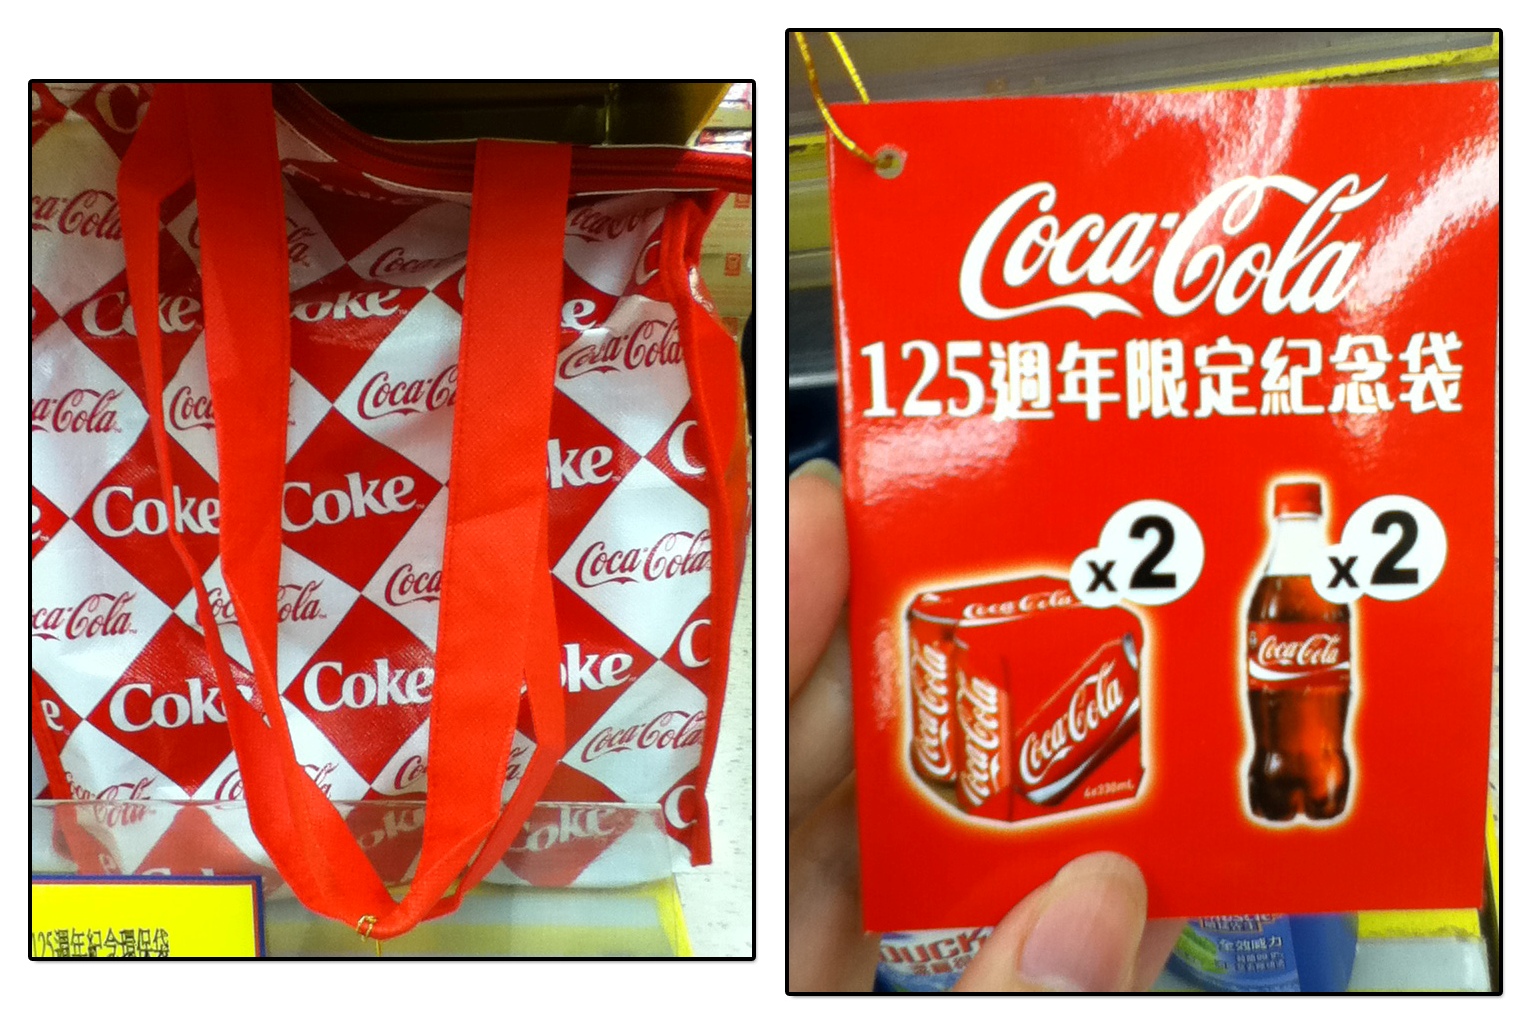 Collectible Philippines Cardboard Coke Coca Cola Promotional Sign share ang saya 